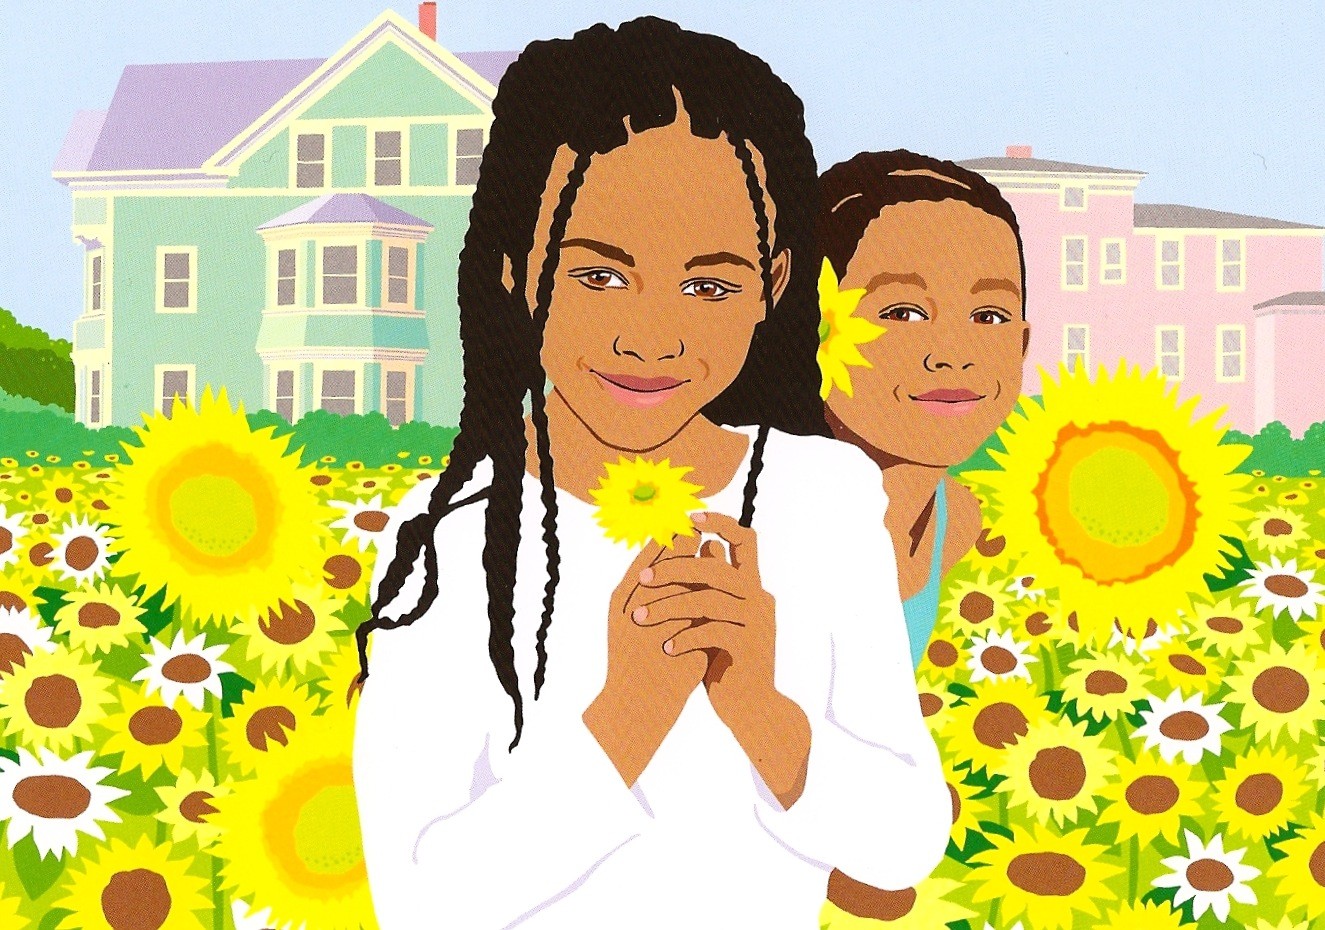 The cover of the 2014 Rhode Island Kids Count Factbook, which found an increasing gap in the well being of Rhode Island's children based upon racial, ethnic and economic indicators.